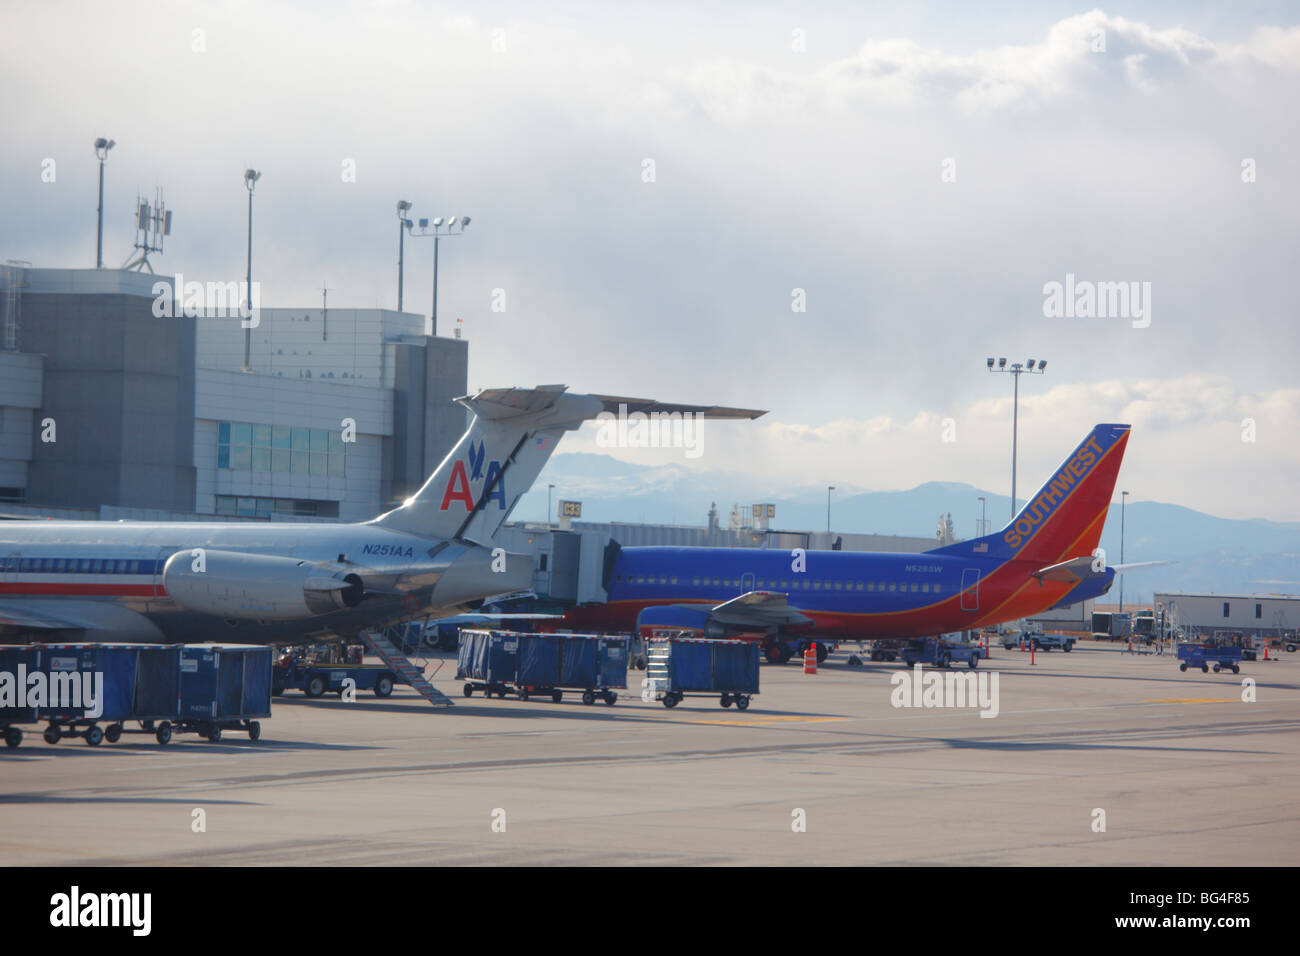 Airplanes at C concourse gates of Denver International Airport in Colorado, USA. Stock Photo